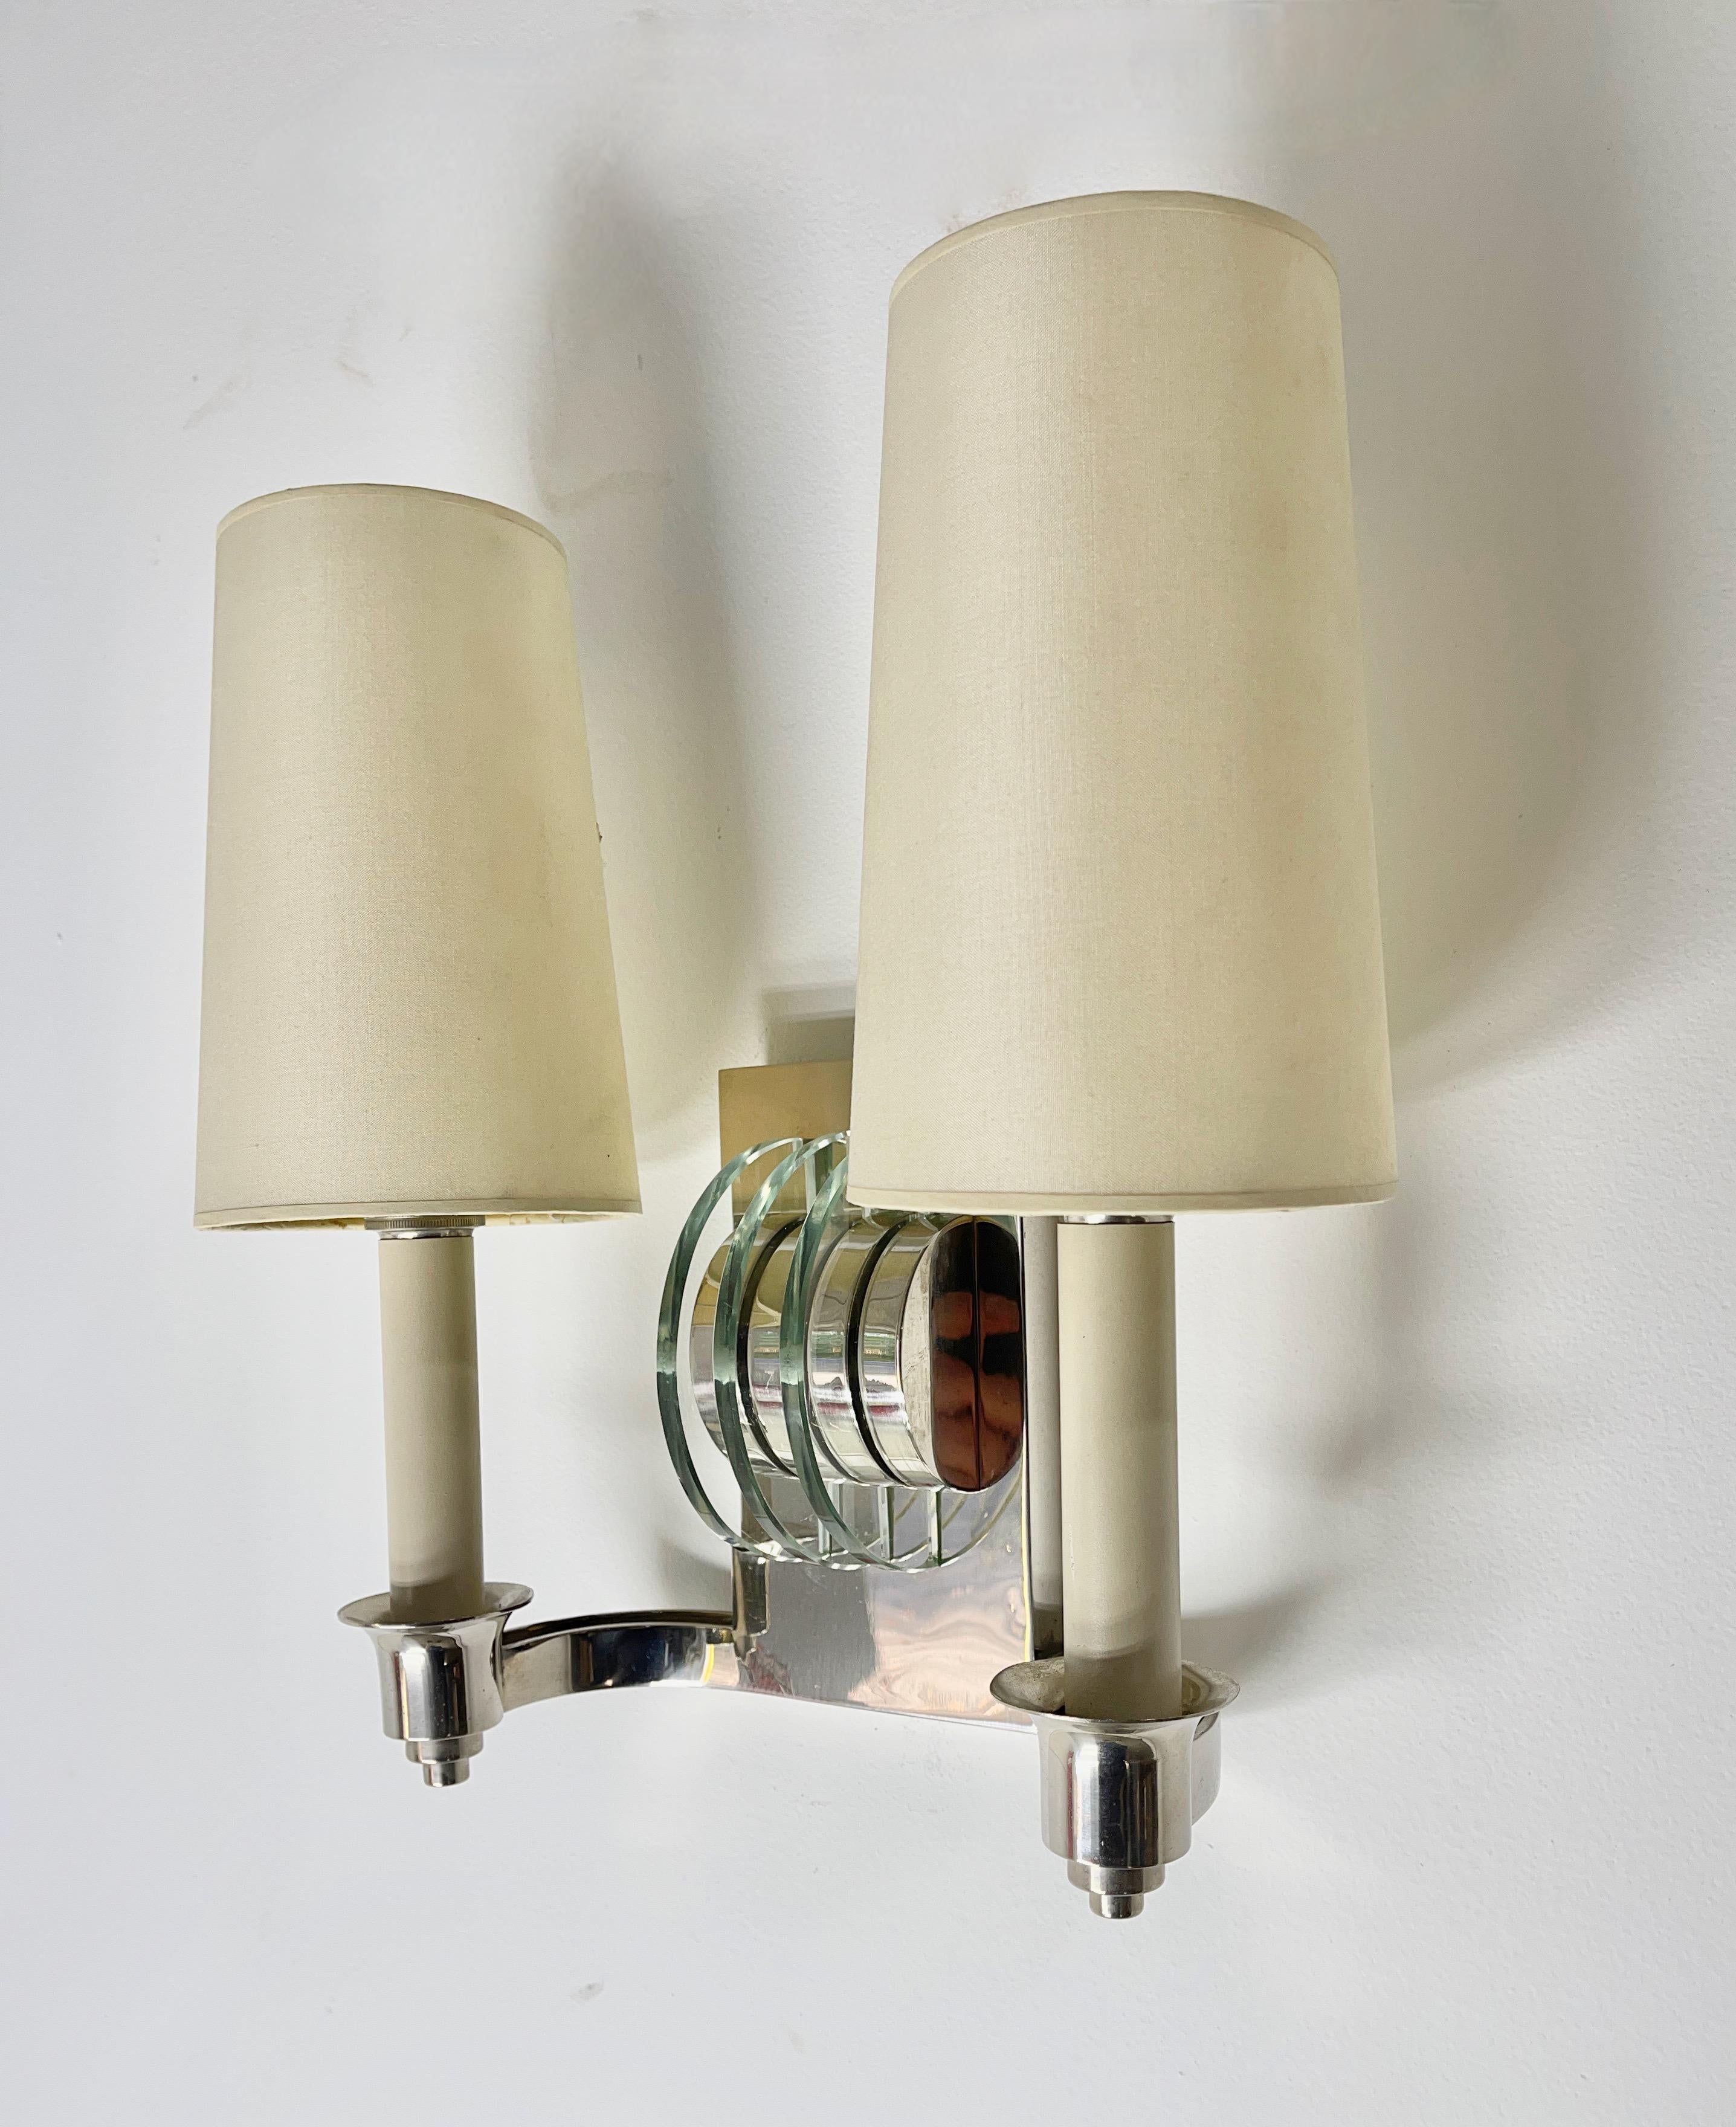 Mid-20th Century Pair of French Polished Nickel and Glass Sconces For Sale